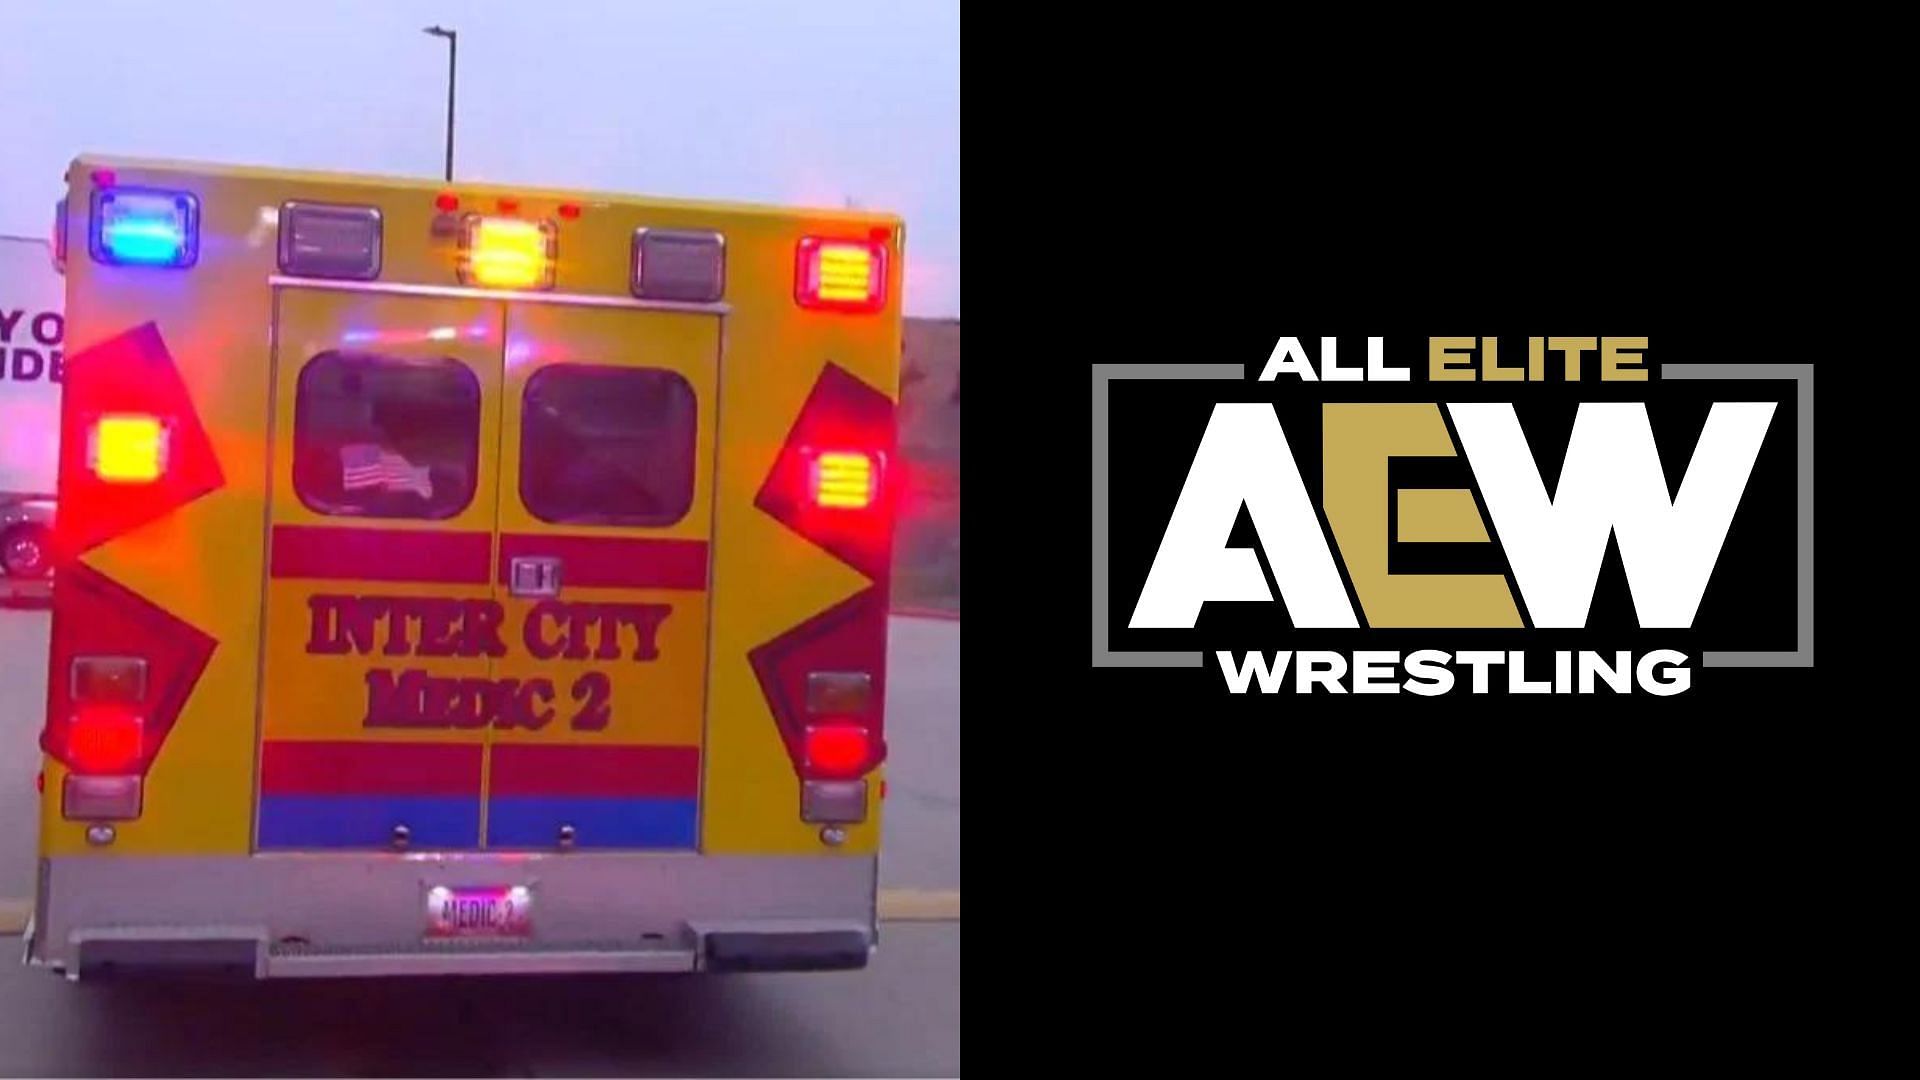 AEW is a Jacksonville-based promotion led by Tony Khan